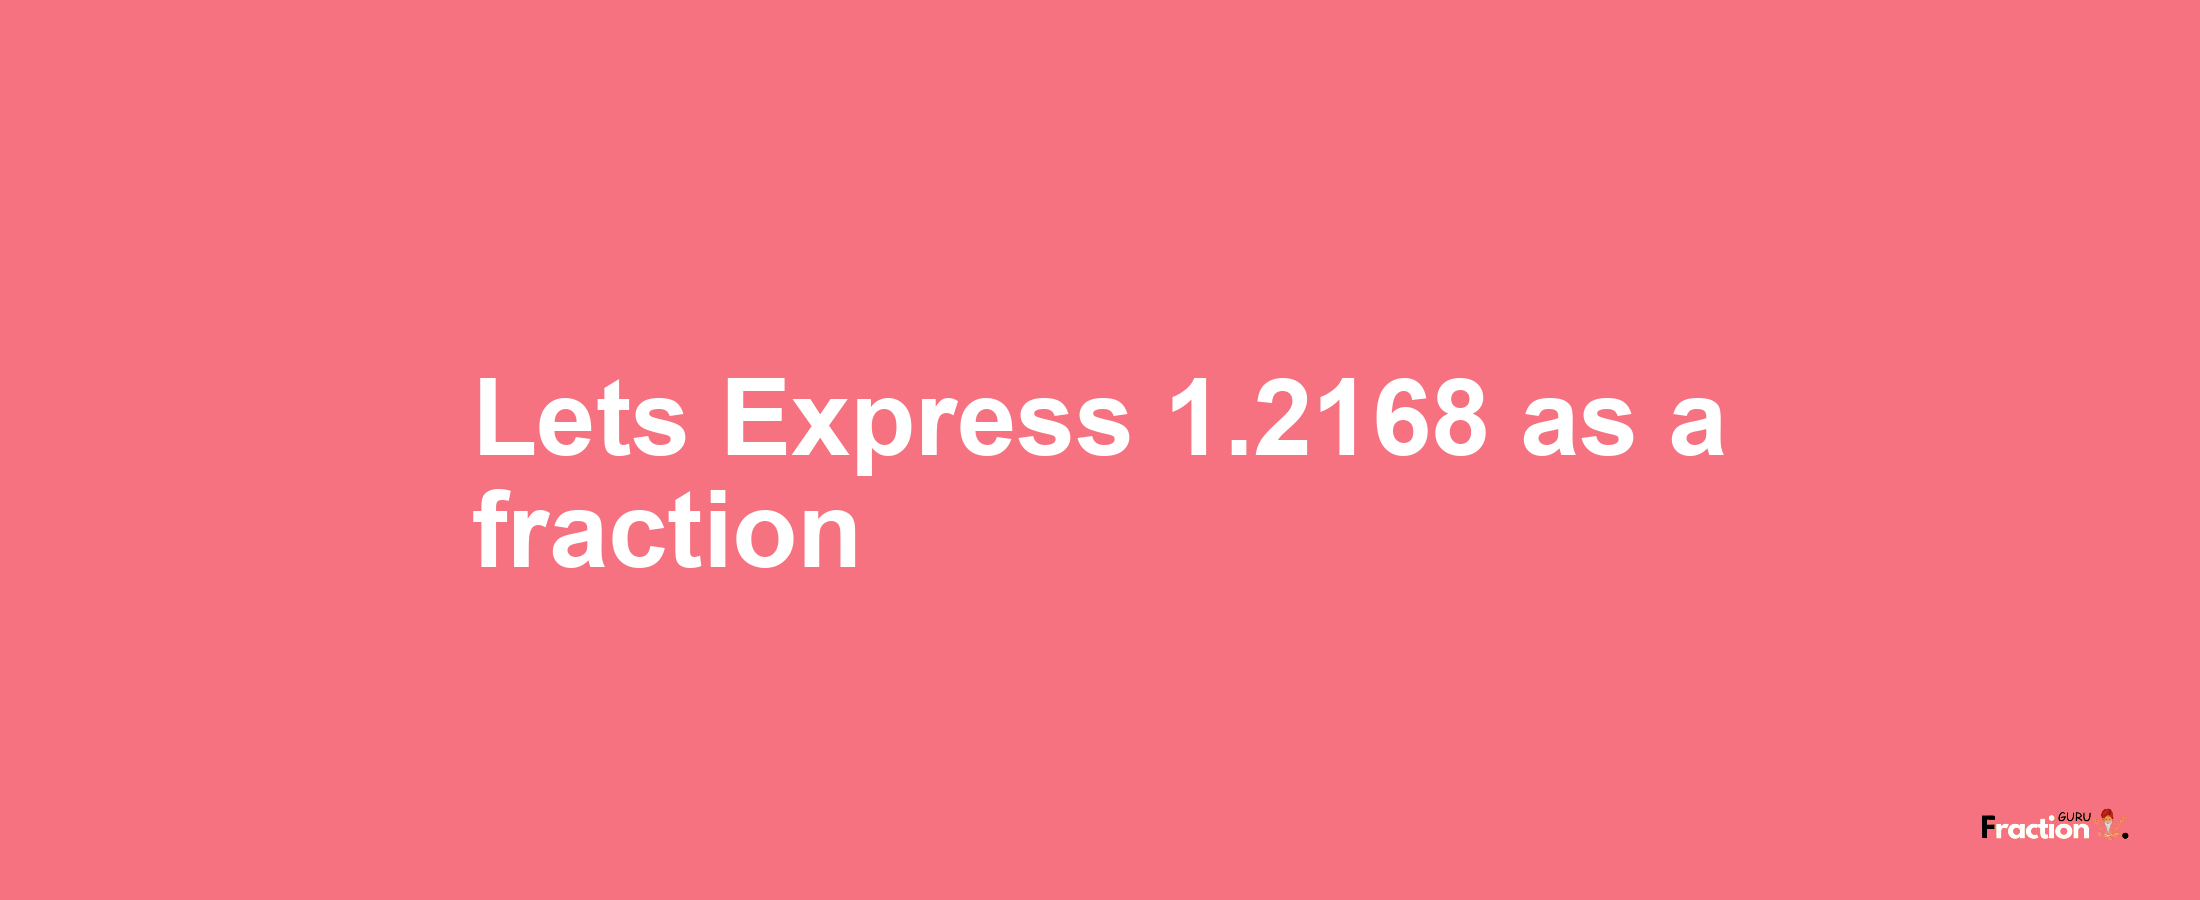 Lets Express 1.2168 as afraction